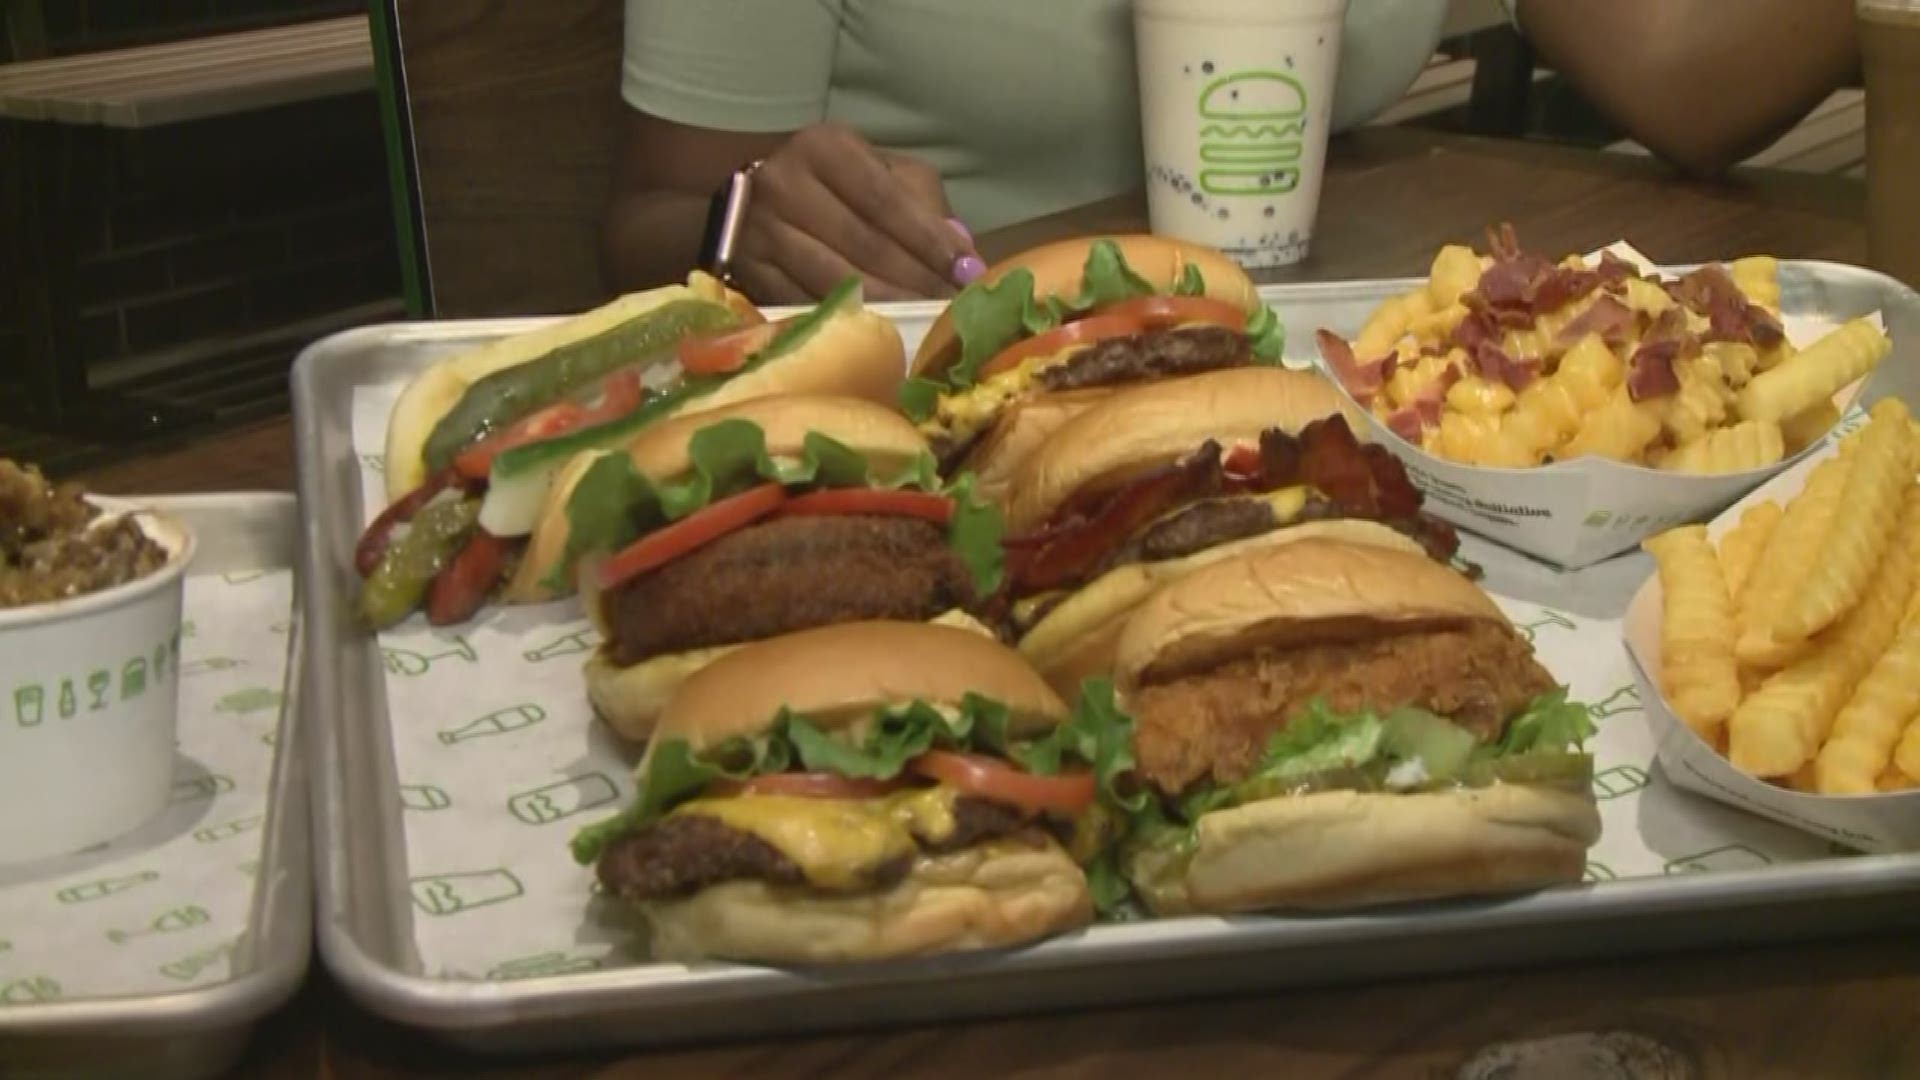 June 7, 2018: The wait is finally over. Shake Shack has arrived in Northeast Ohio with a new location in Orange Village.